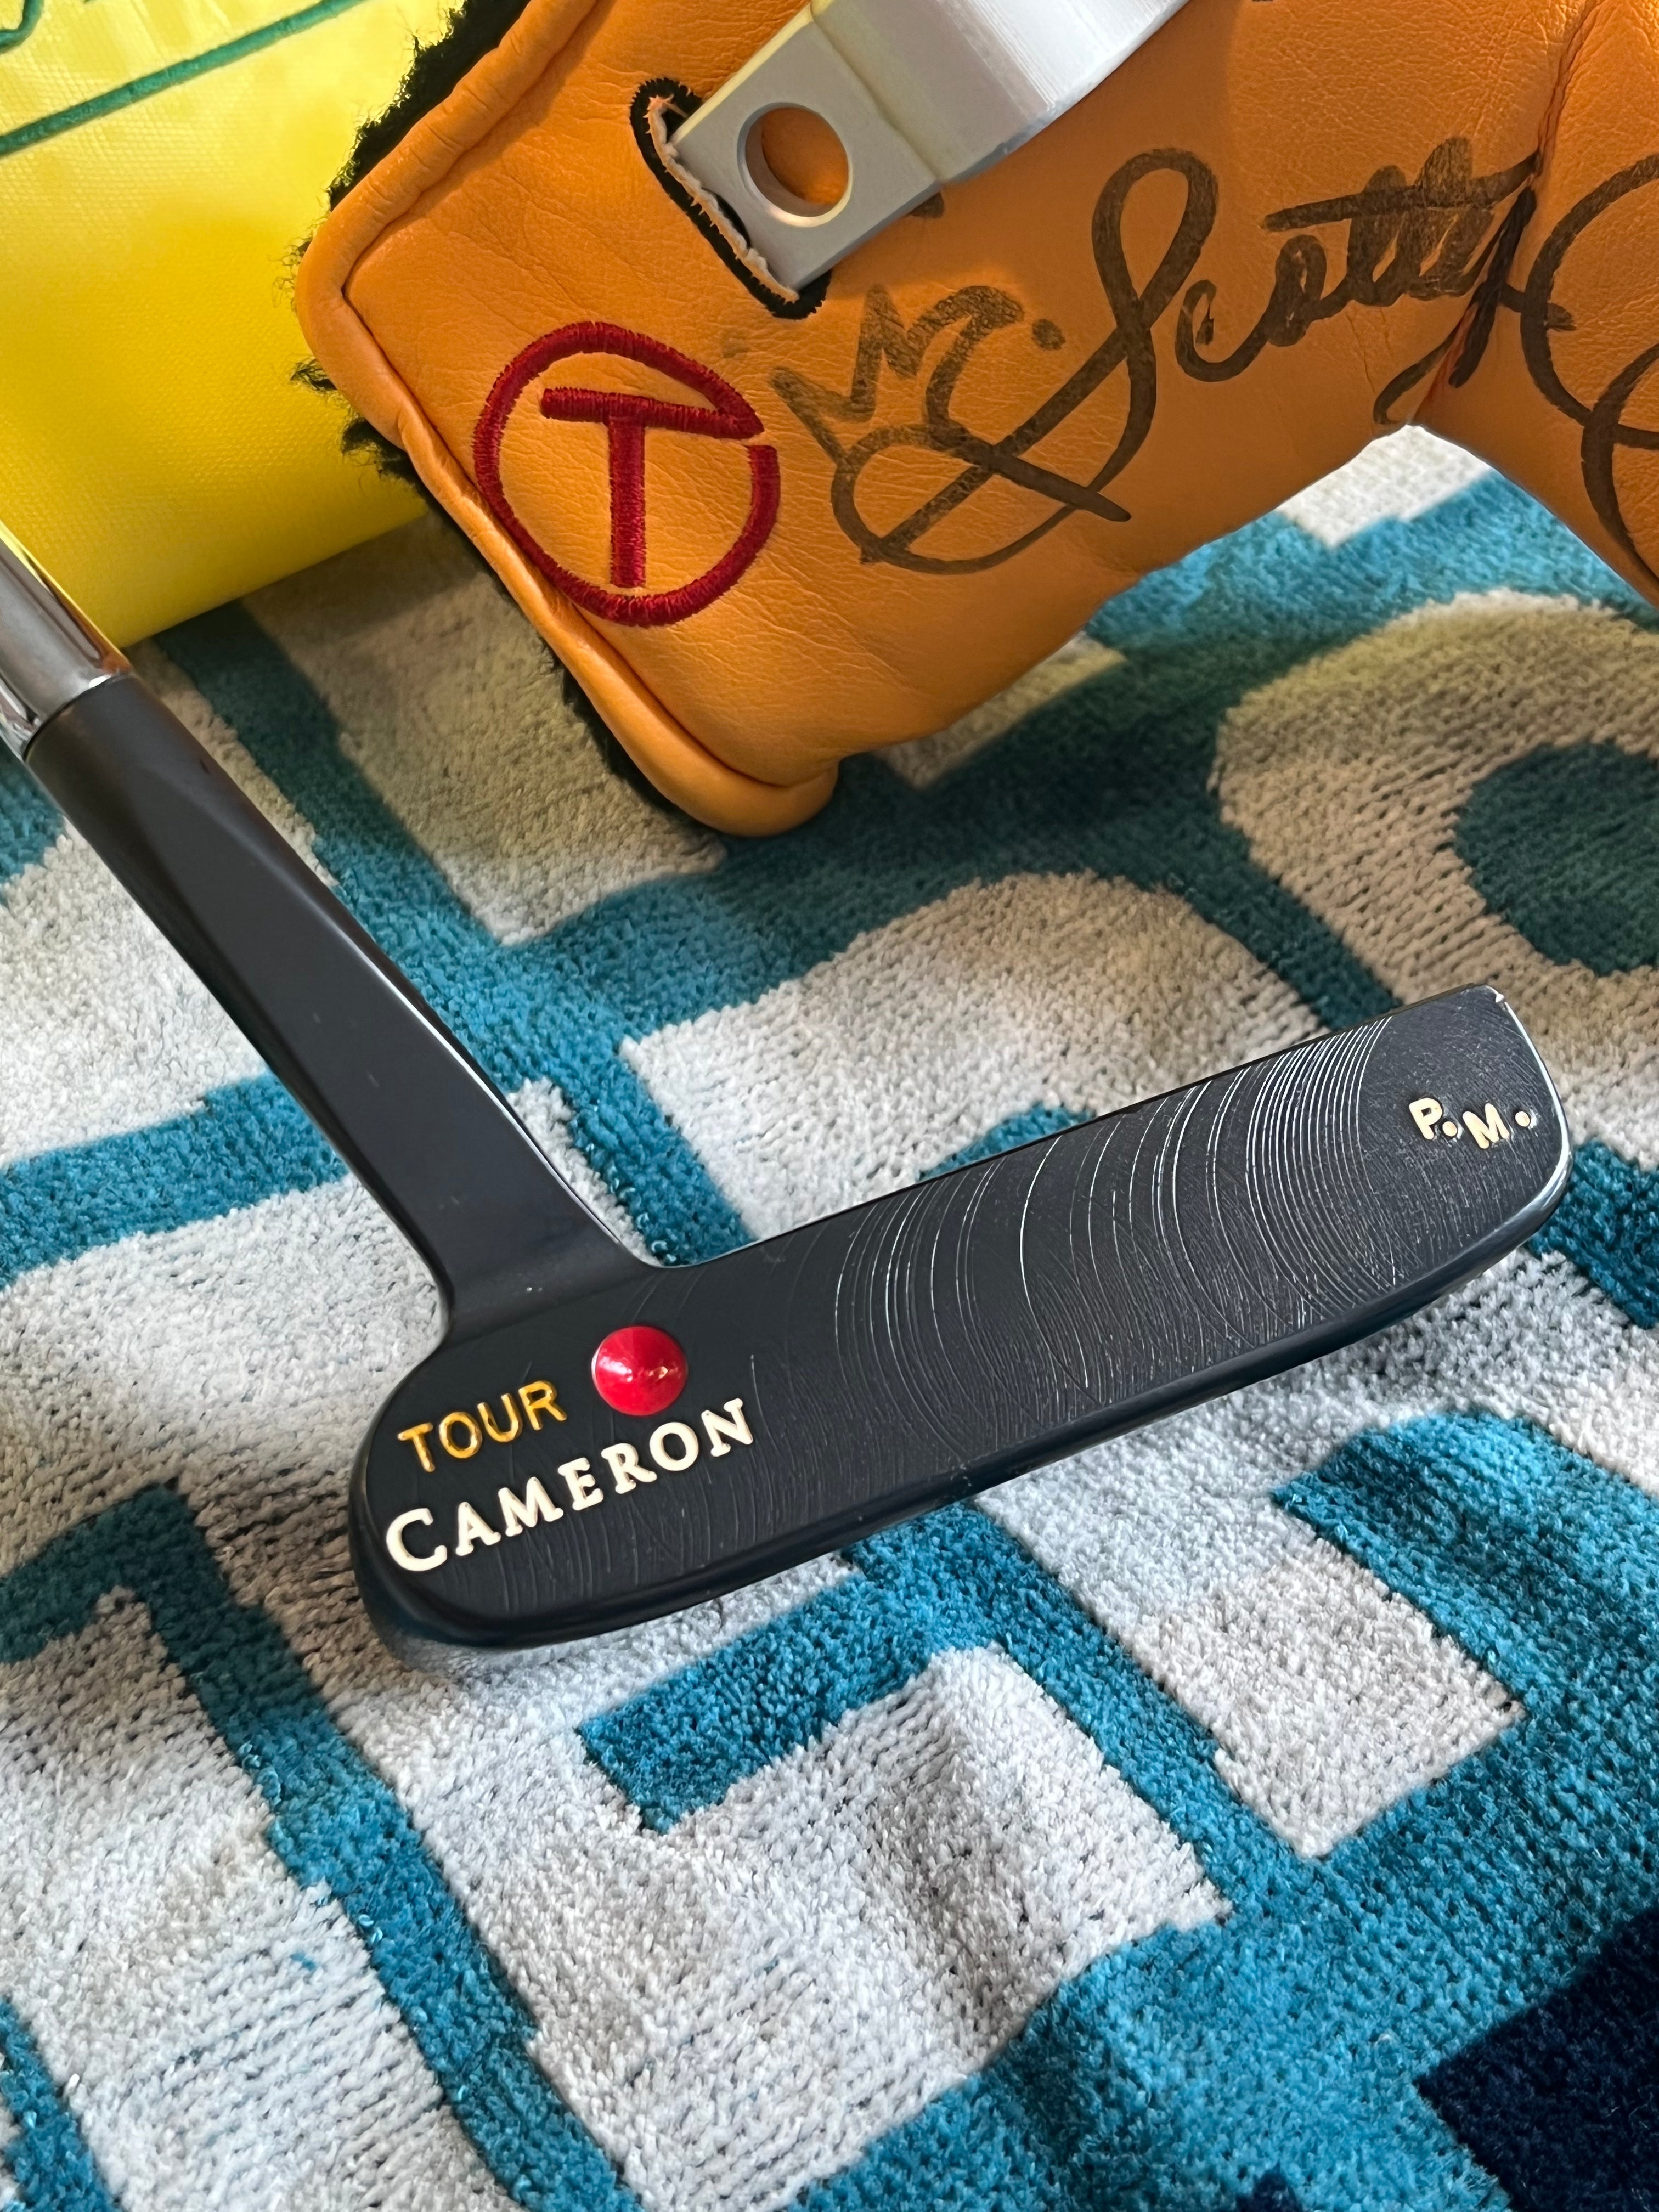 Made for Phil Mickelson left handed Scotty Cameron putter